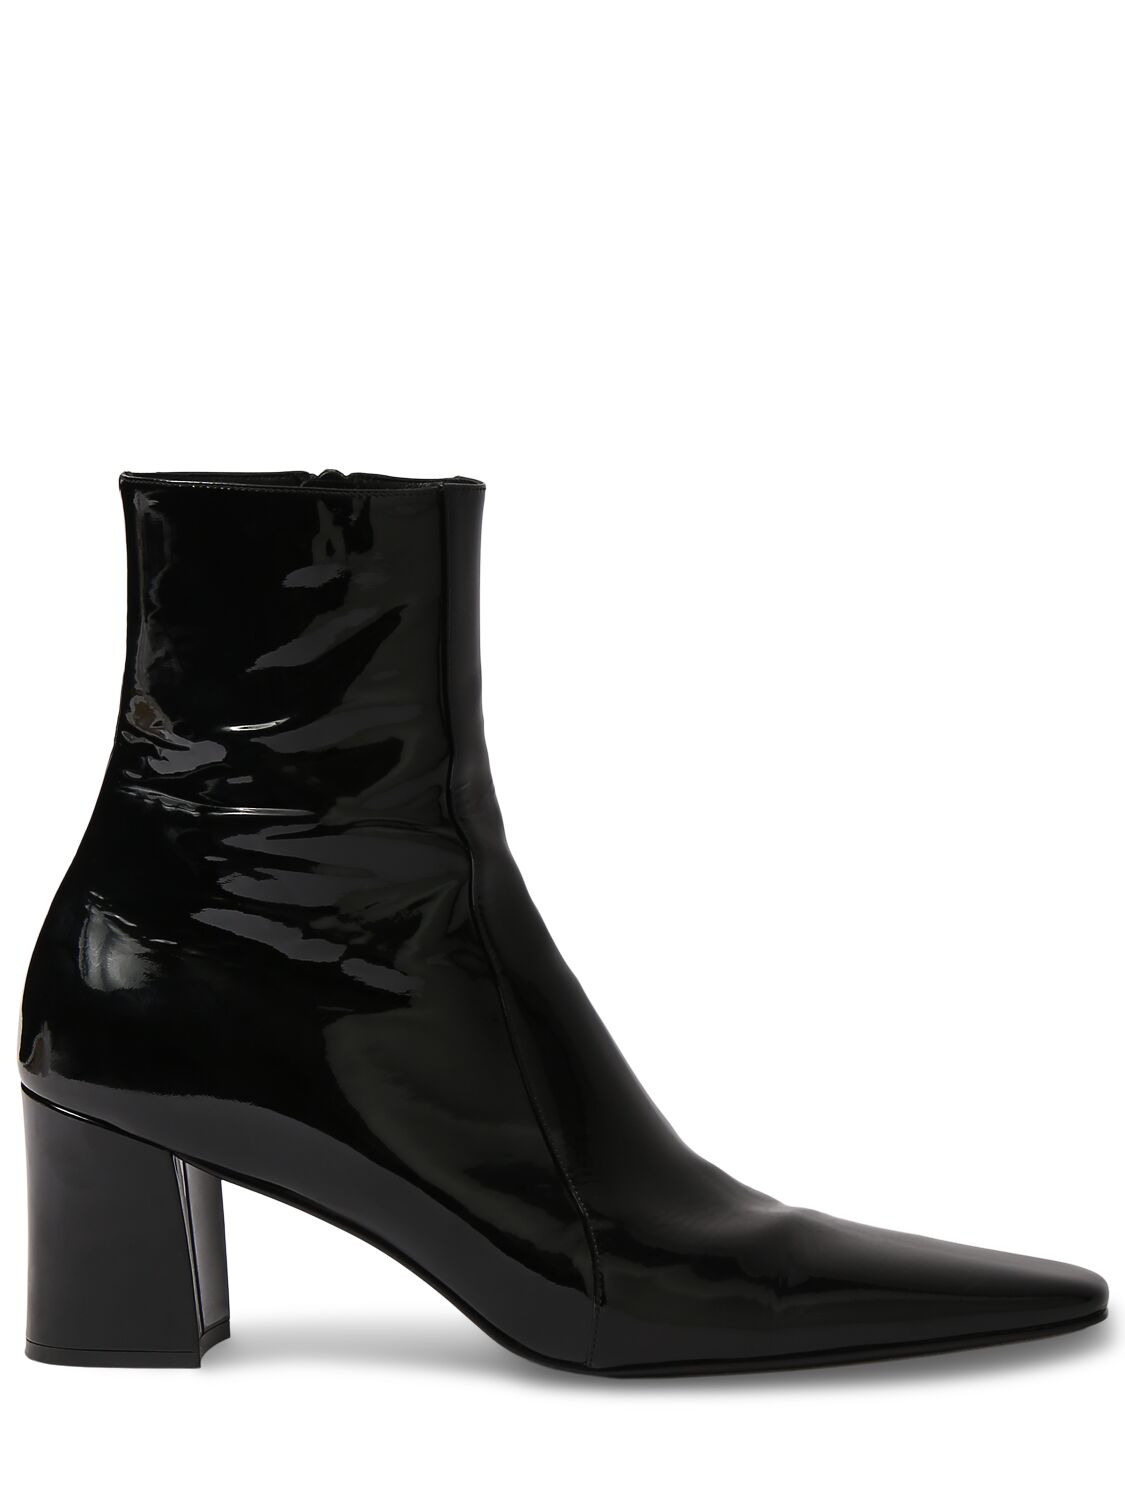 Image of Rainer 75 Leather Zipped Boots